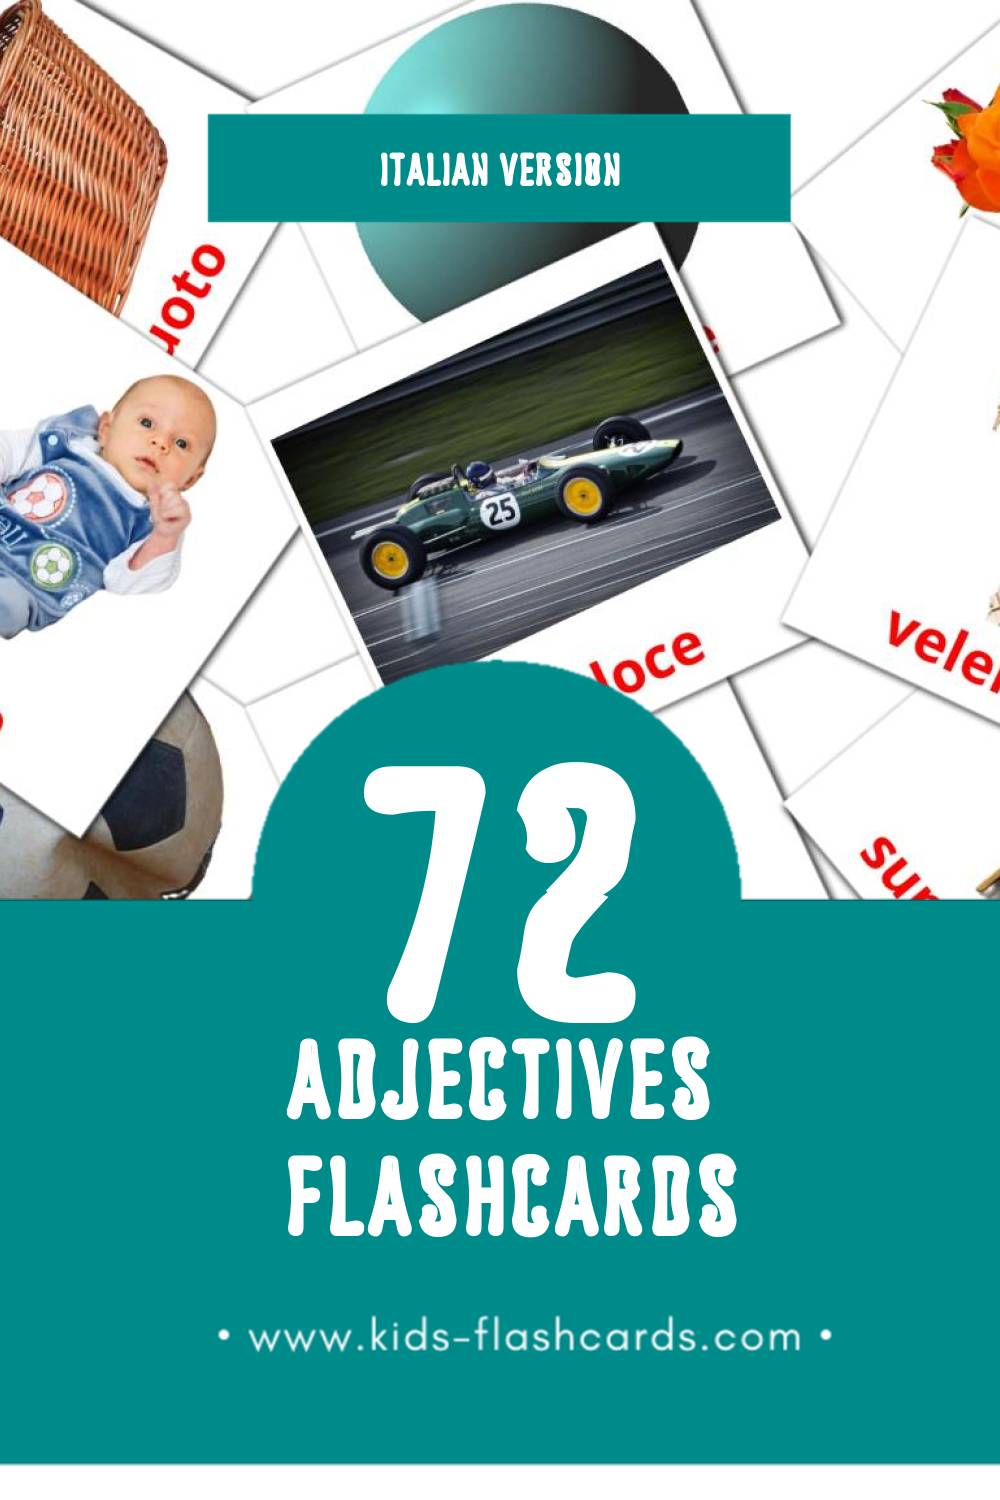 Visual Ajectives Flashcards for Toddlers (74 cards in Italian)